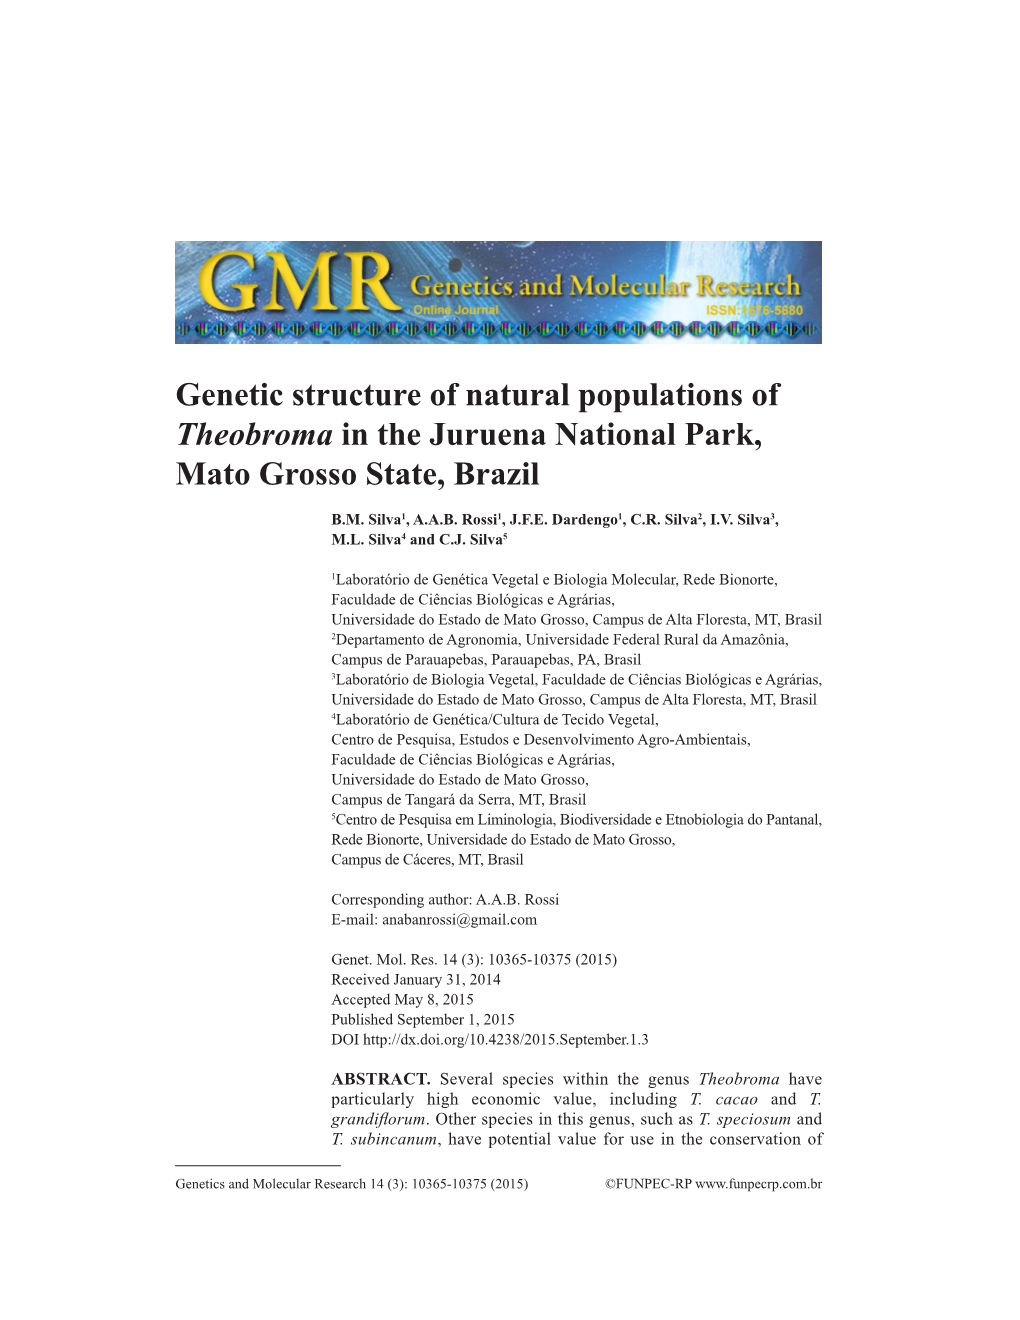 Genetic Structure of Natural Populations of Theobroma in the Juruena National Park, Mato Grosso State, Brazil